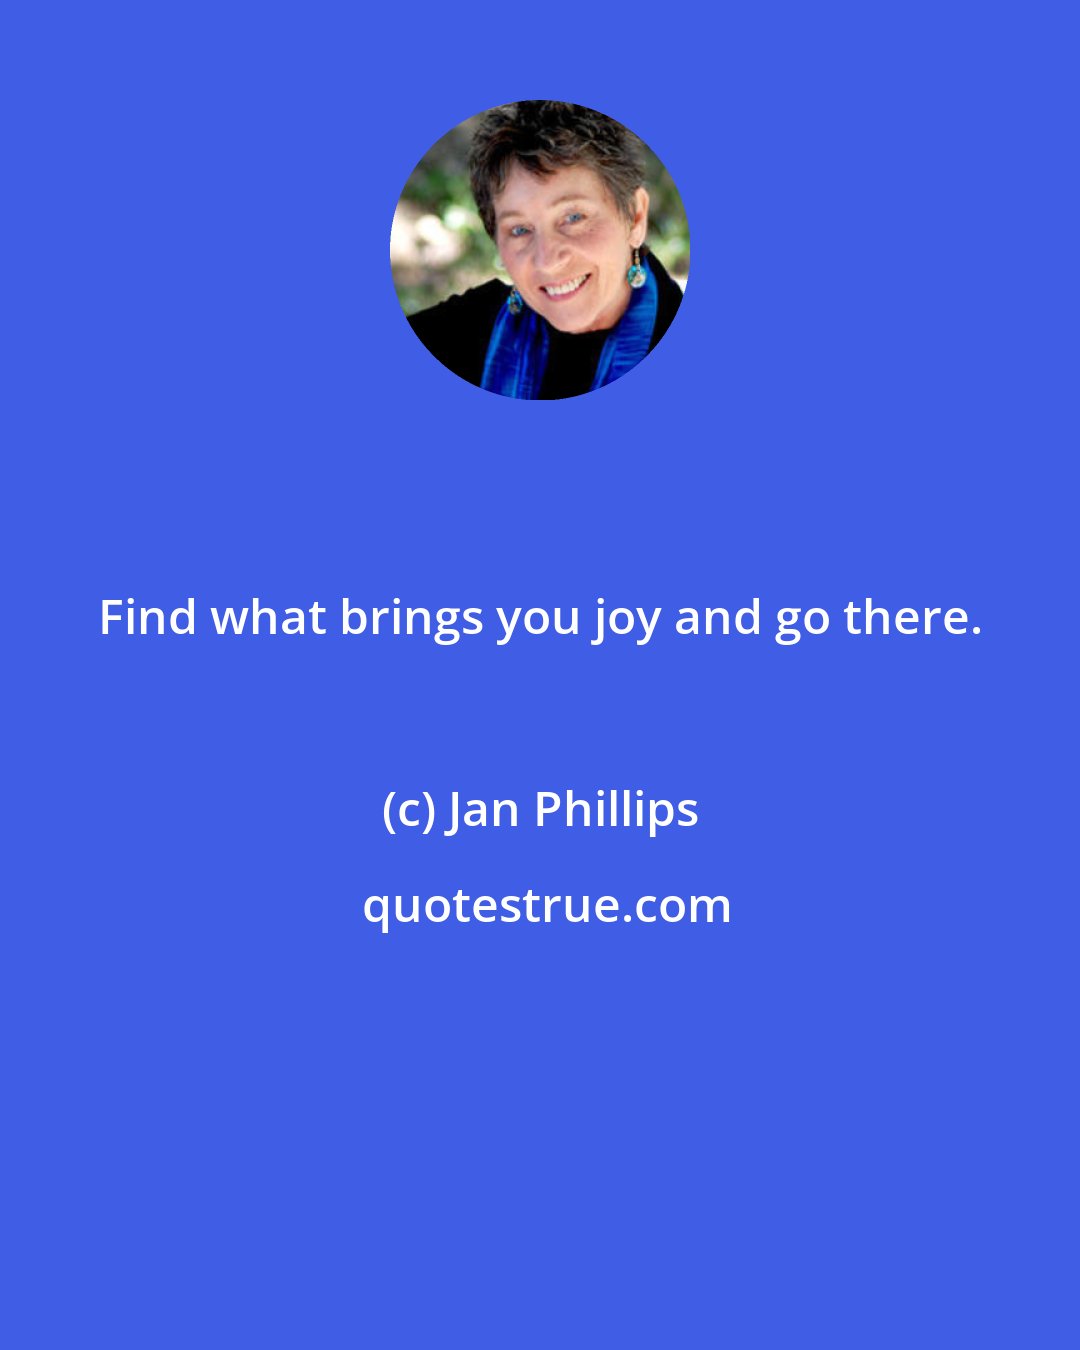 Jan Phillips: Find what brings you joy and go there.